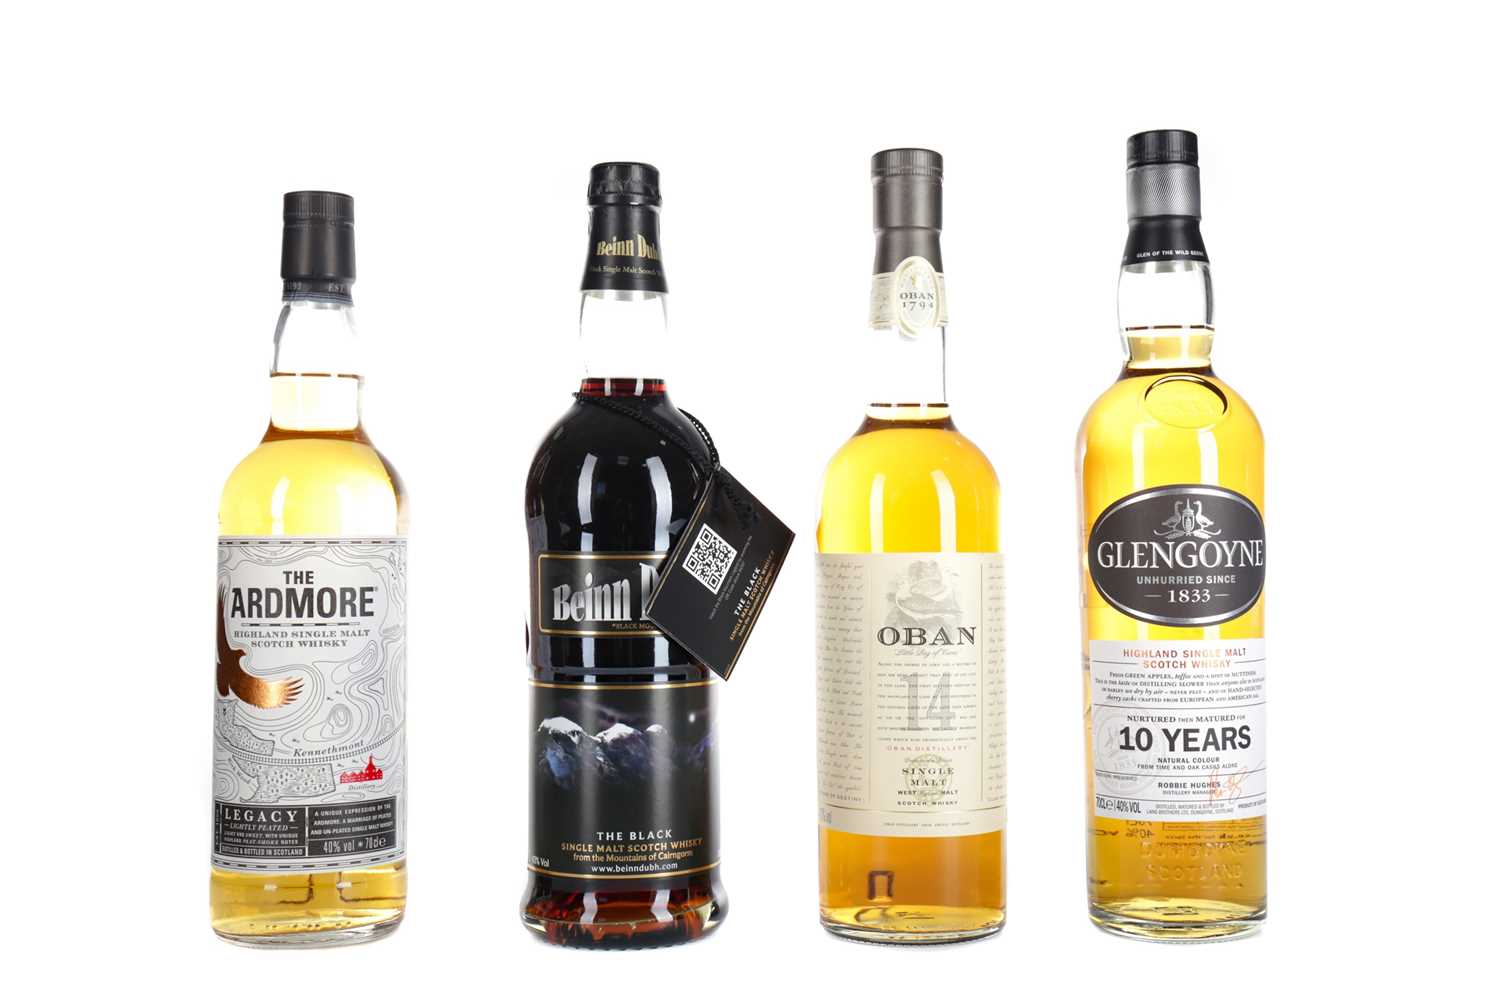 Lot 237 - OBAN AGED 14 YEARS, GLENGOYNE AGED 10 YEARS, ARDMORE TRADITIONAL AND BEINN DUDH